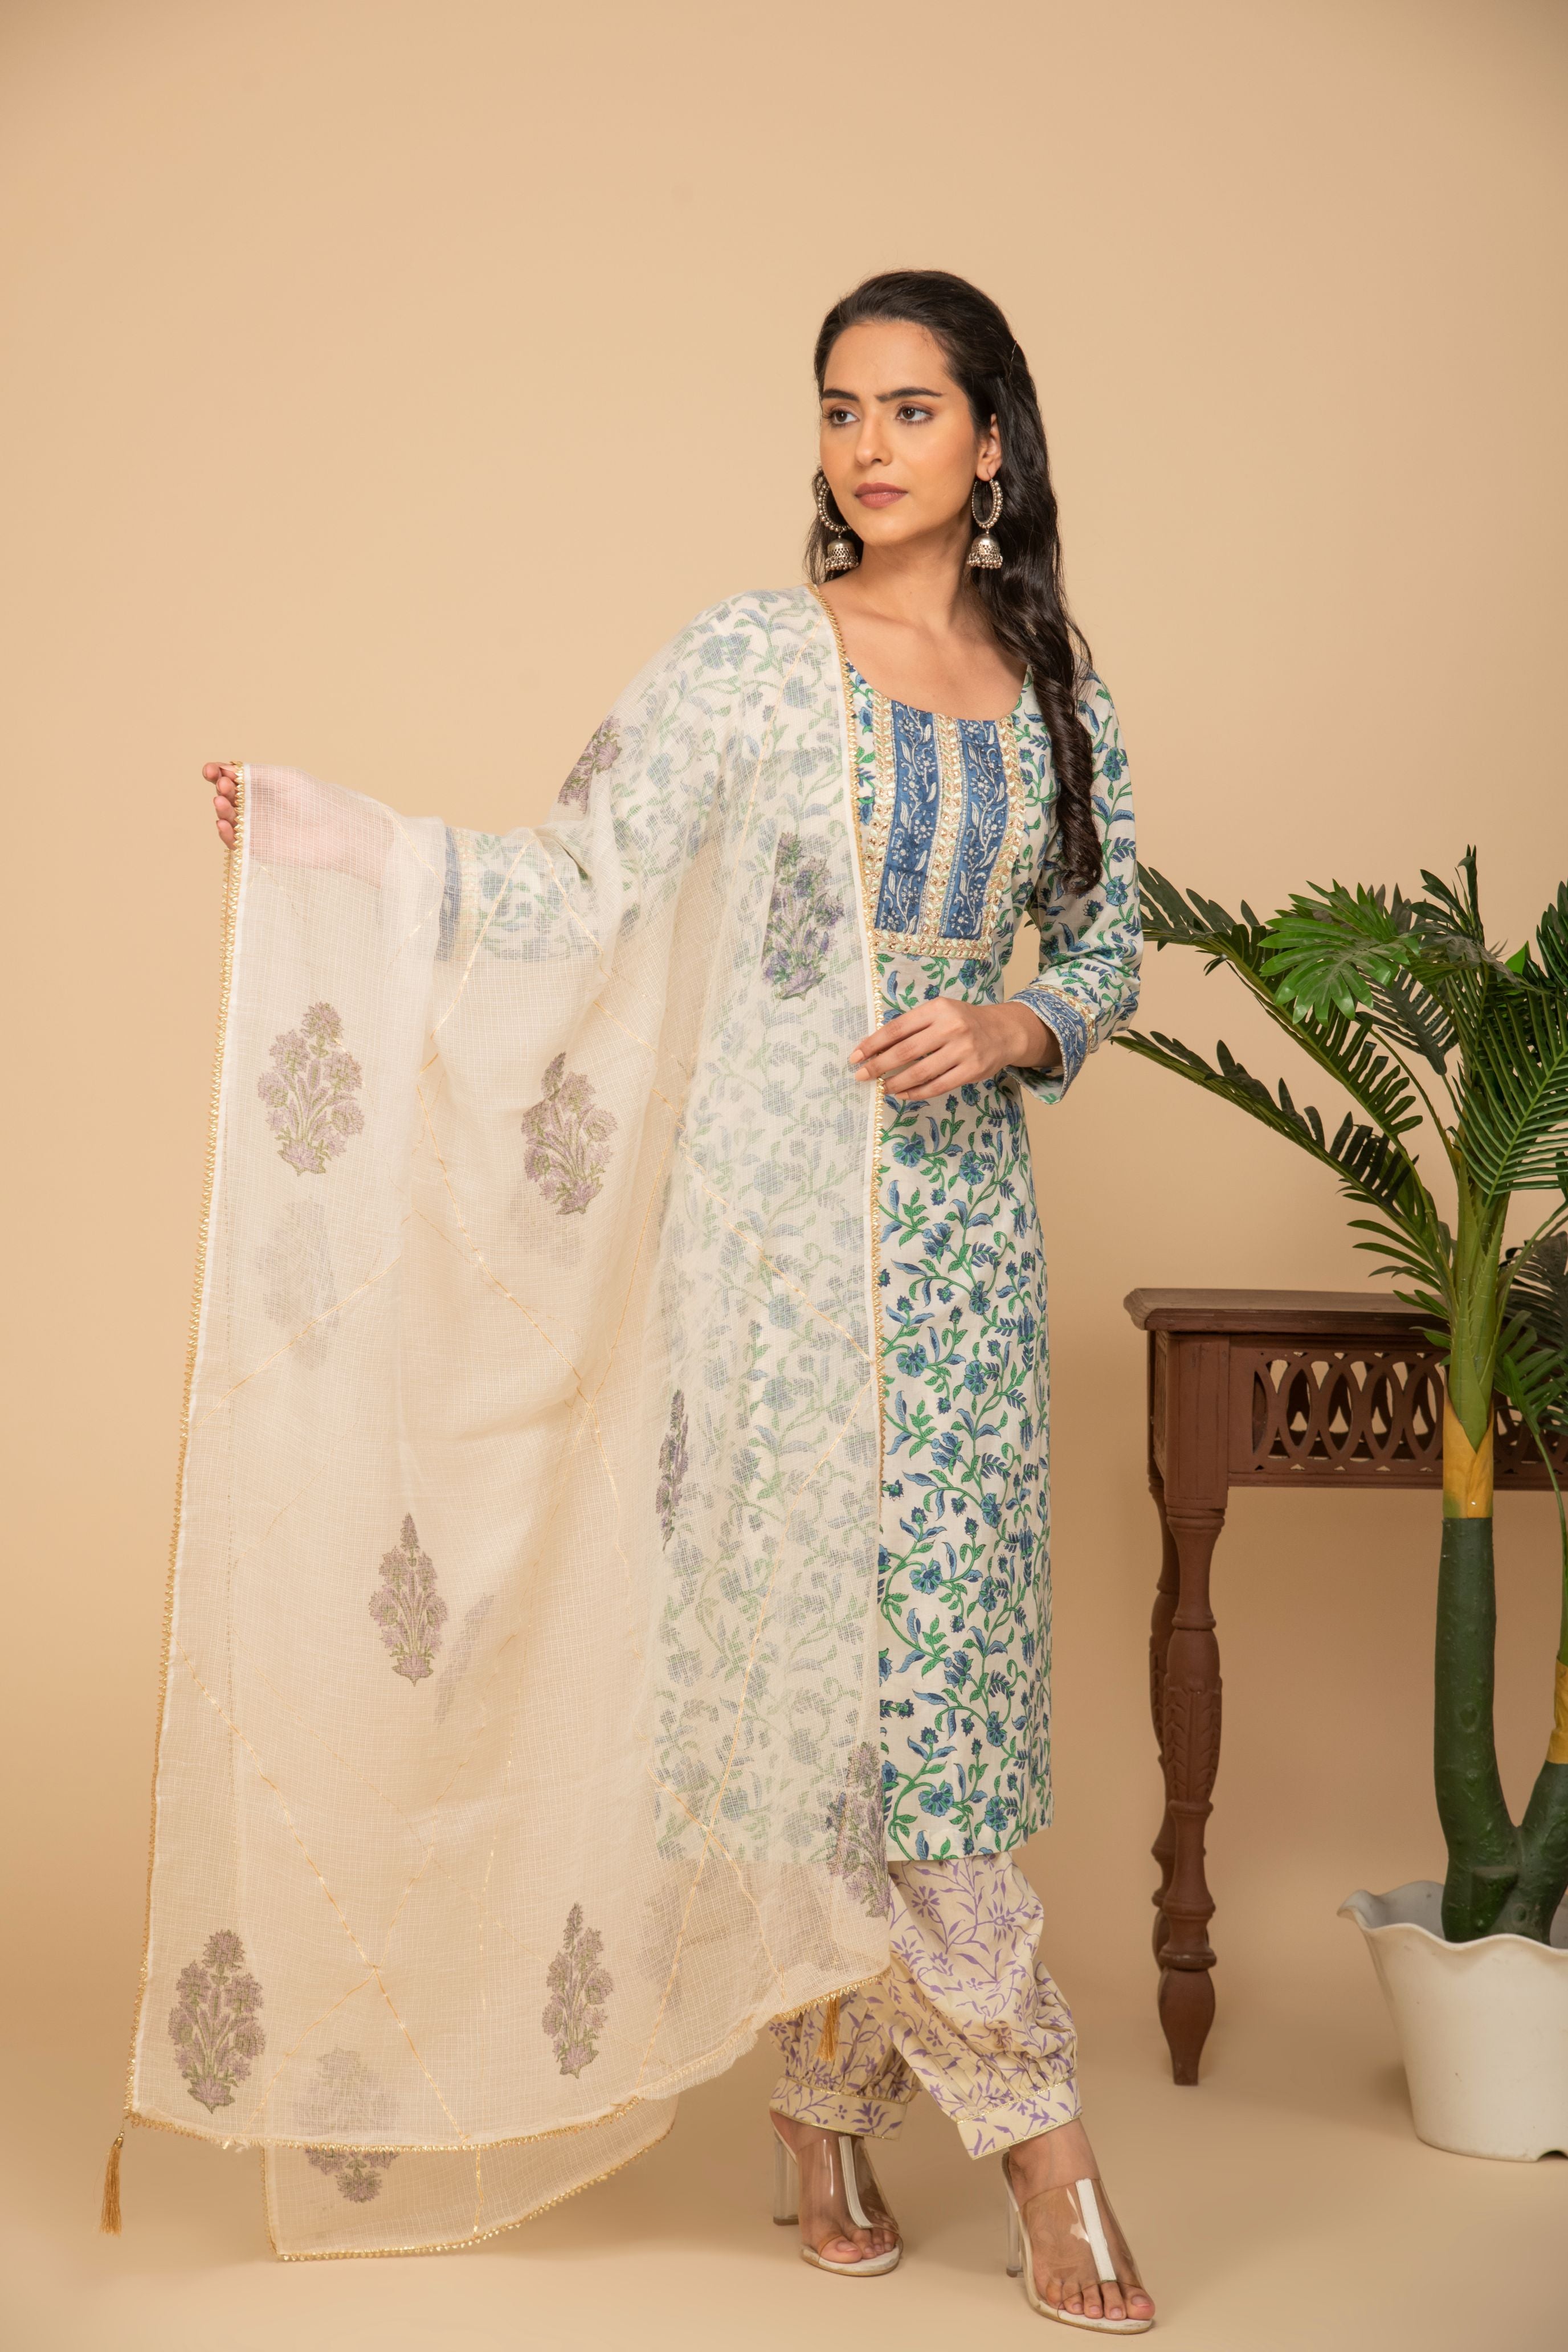 Blue floral printed kurta with white/green printed bottom 3 piece suit set with printed buttis all over dupatta.